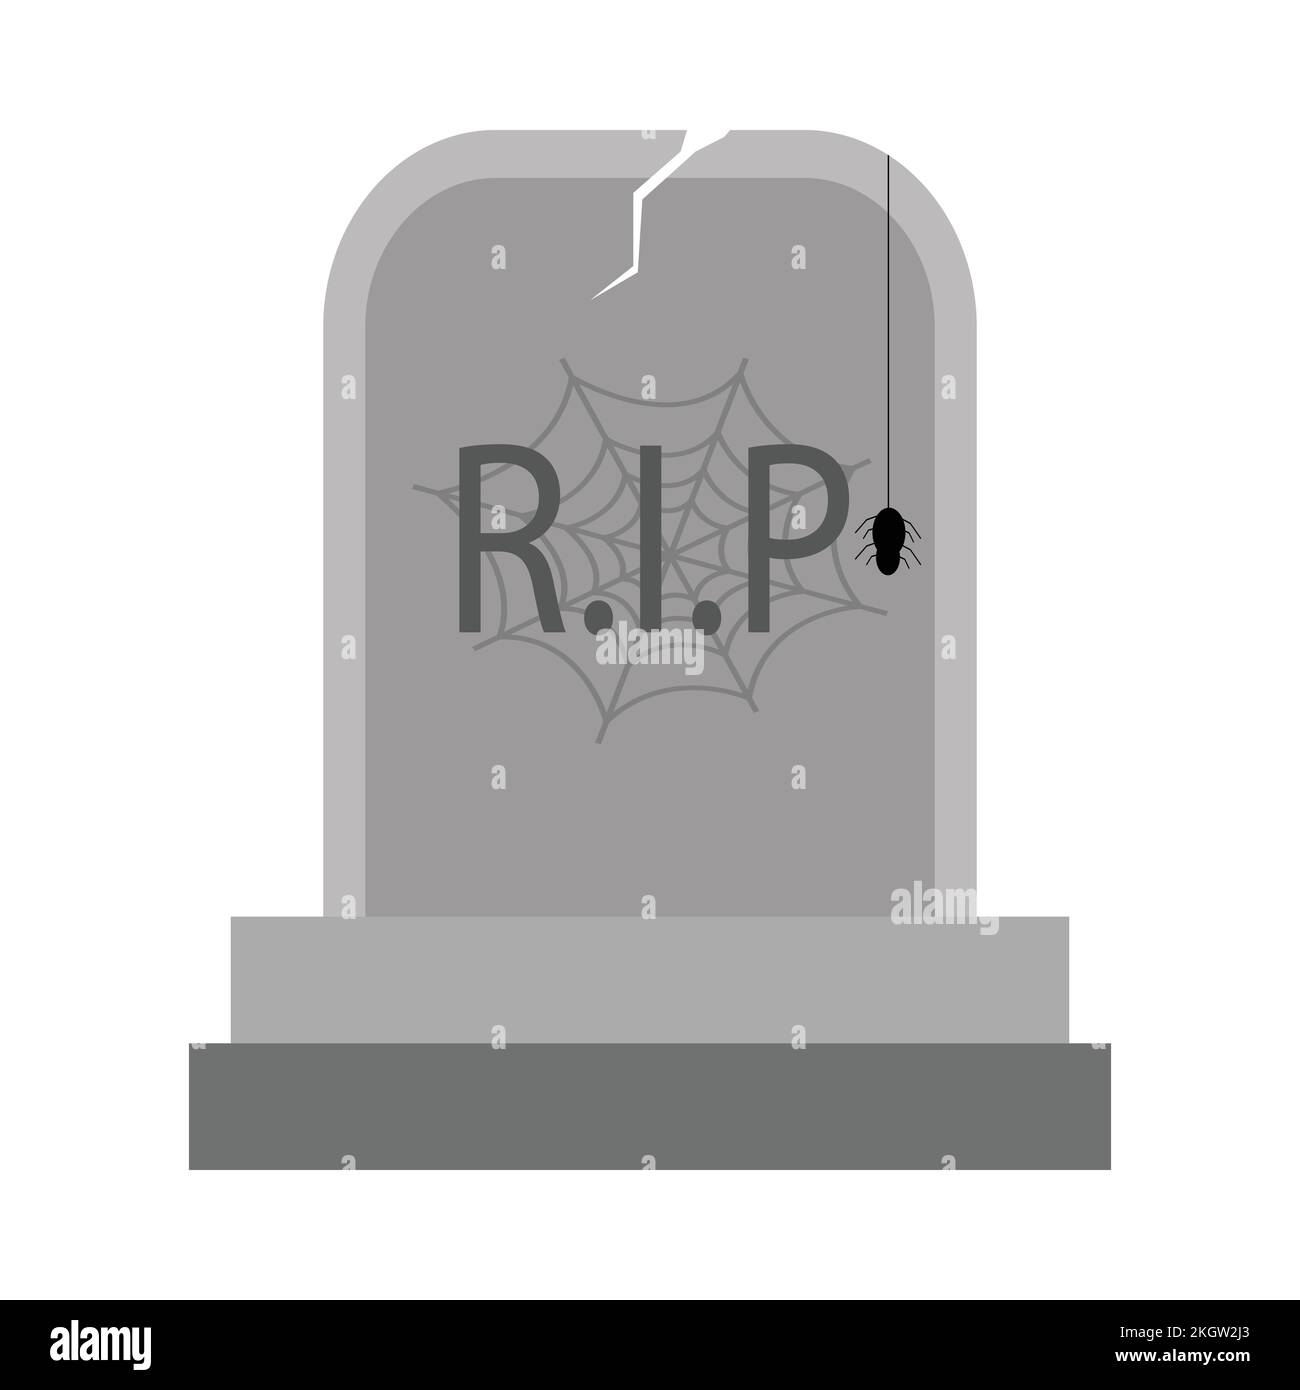 Halloween scary grave stone vector with a spider. Halloween illustration design with the stone tomb and R.I.P sign. Old scary burial design with spide Stock Vector